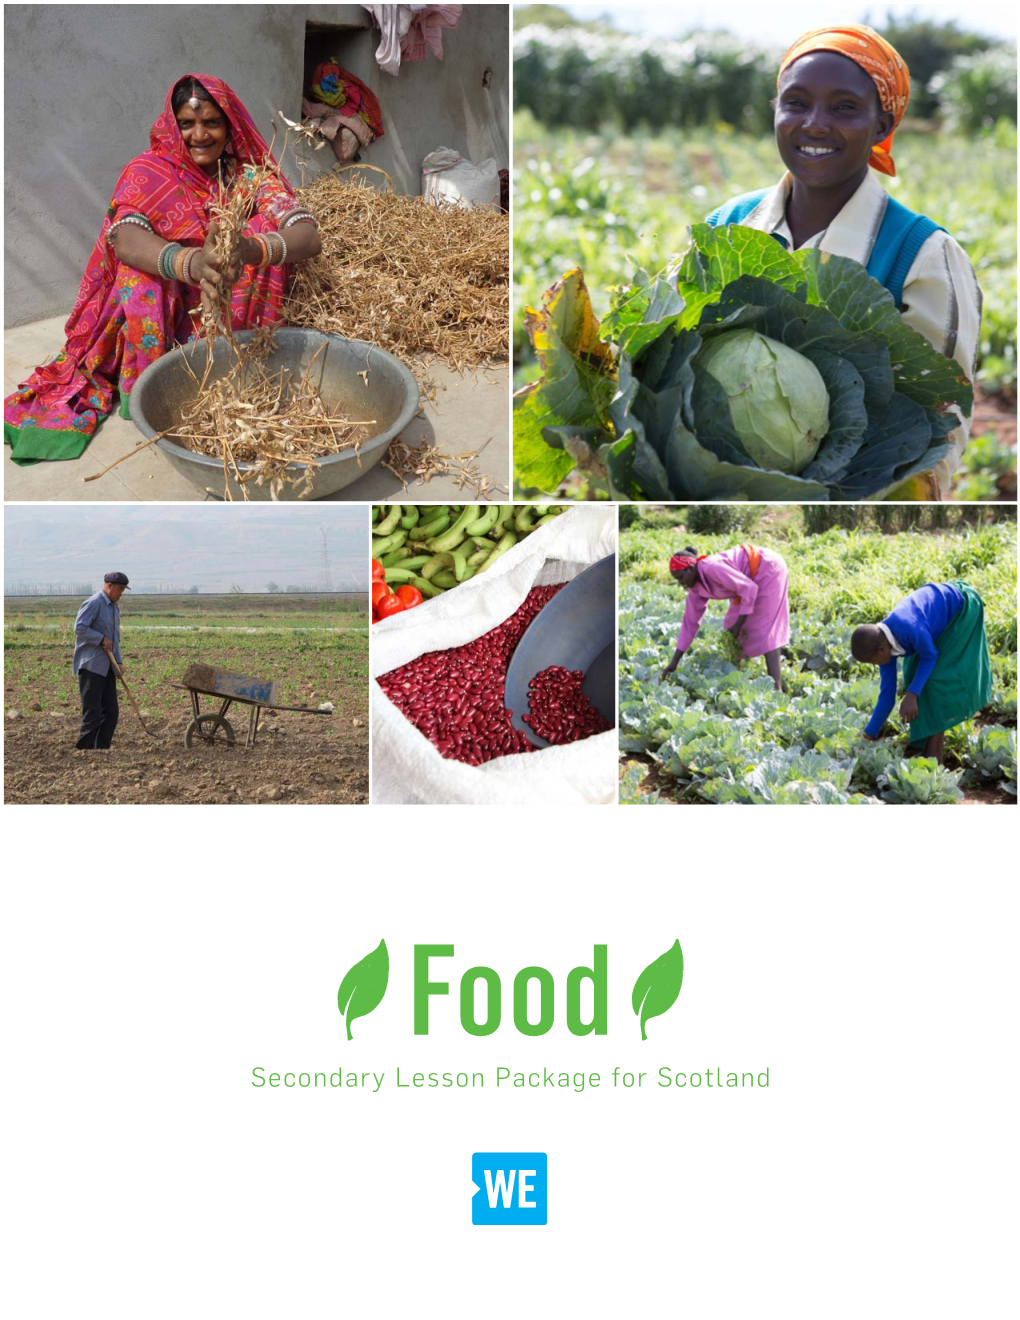 Secondary Lesson Package for Scotland Food: Secondary Lesson Package for Scotland